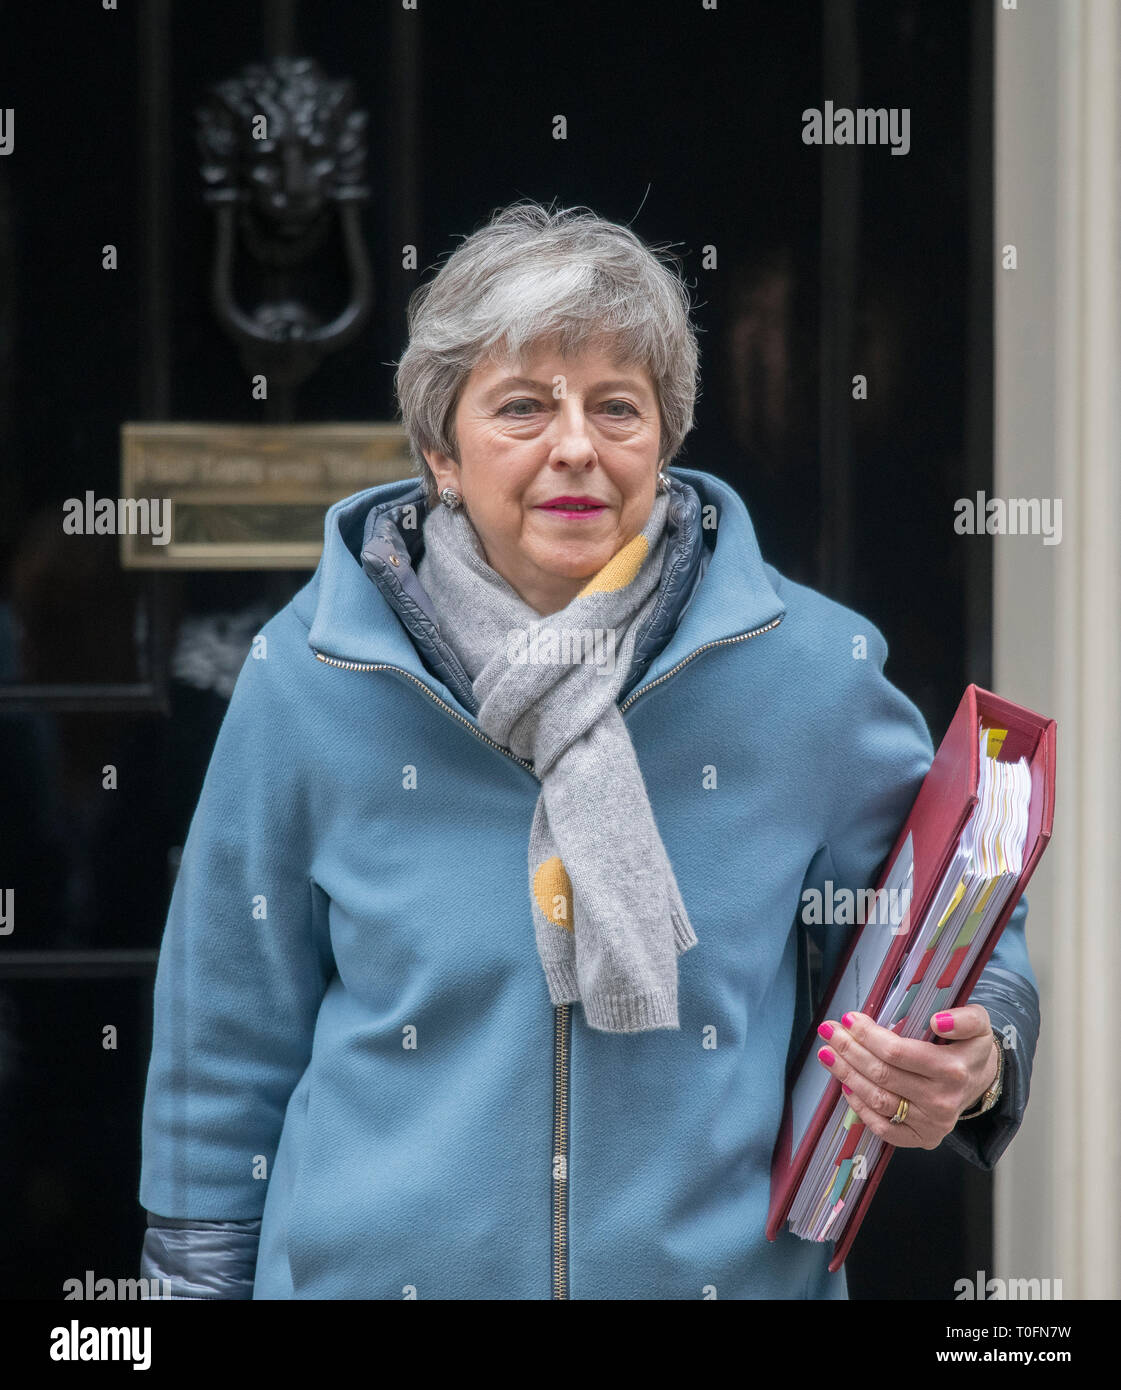 10 Downing Street, London, UK. 20 March 2019. British Prime Minister Theresa May leaving No 10 to attend weekly Prime Minister’s Questions in Parliament. Credit: Malcolm Park/Alamy Live News. Stock Photo